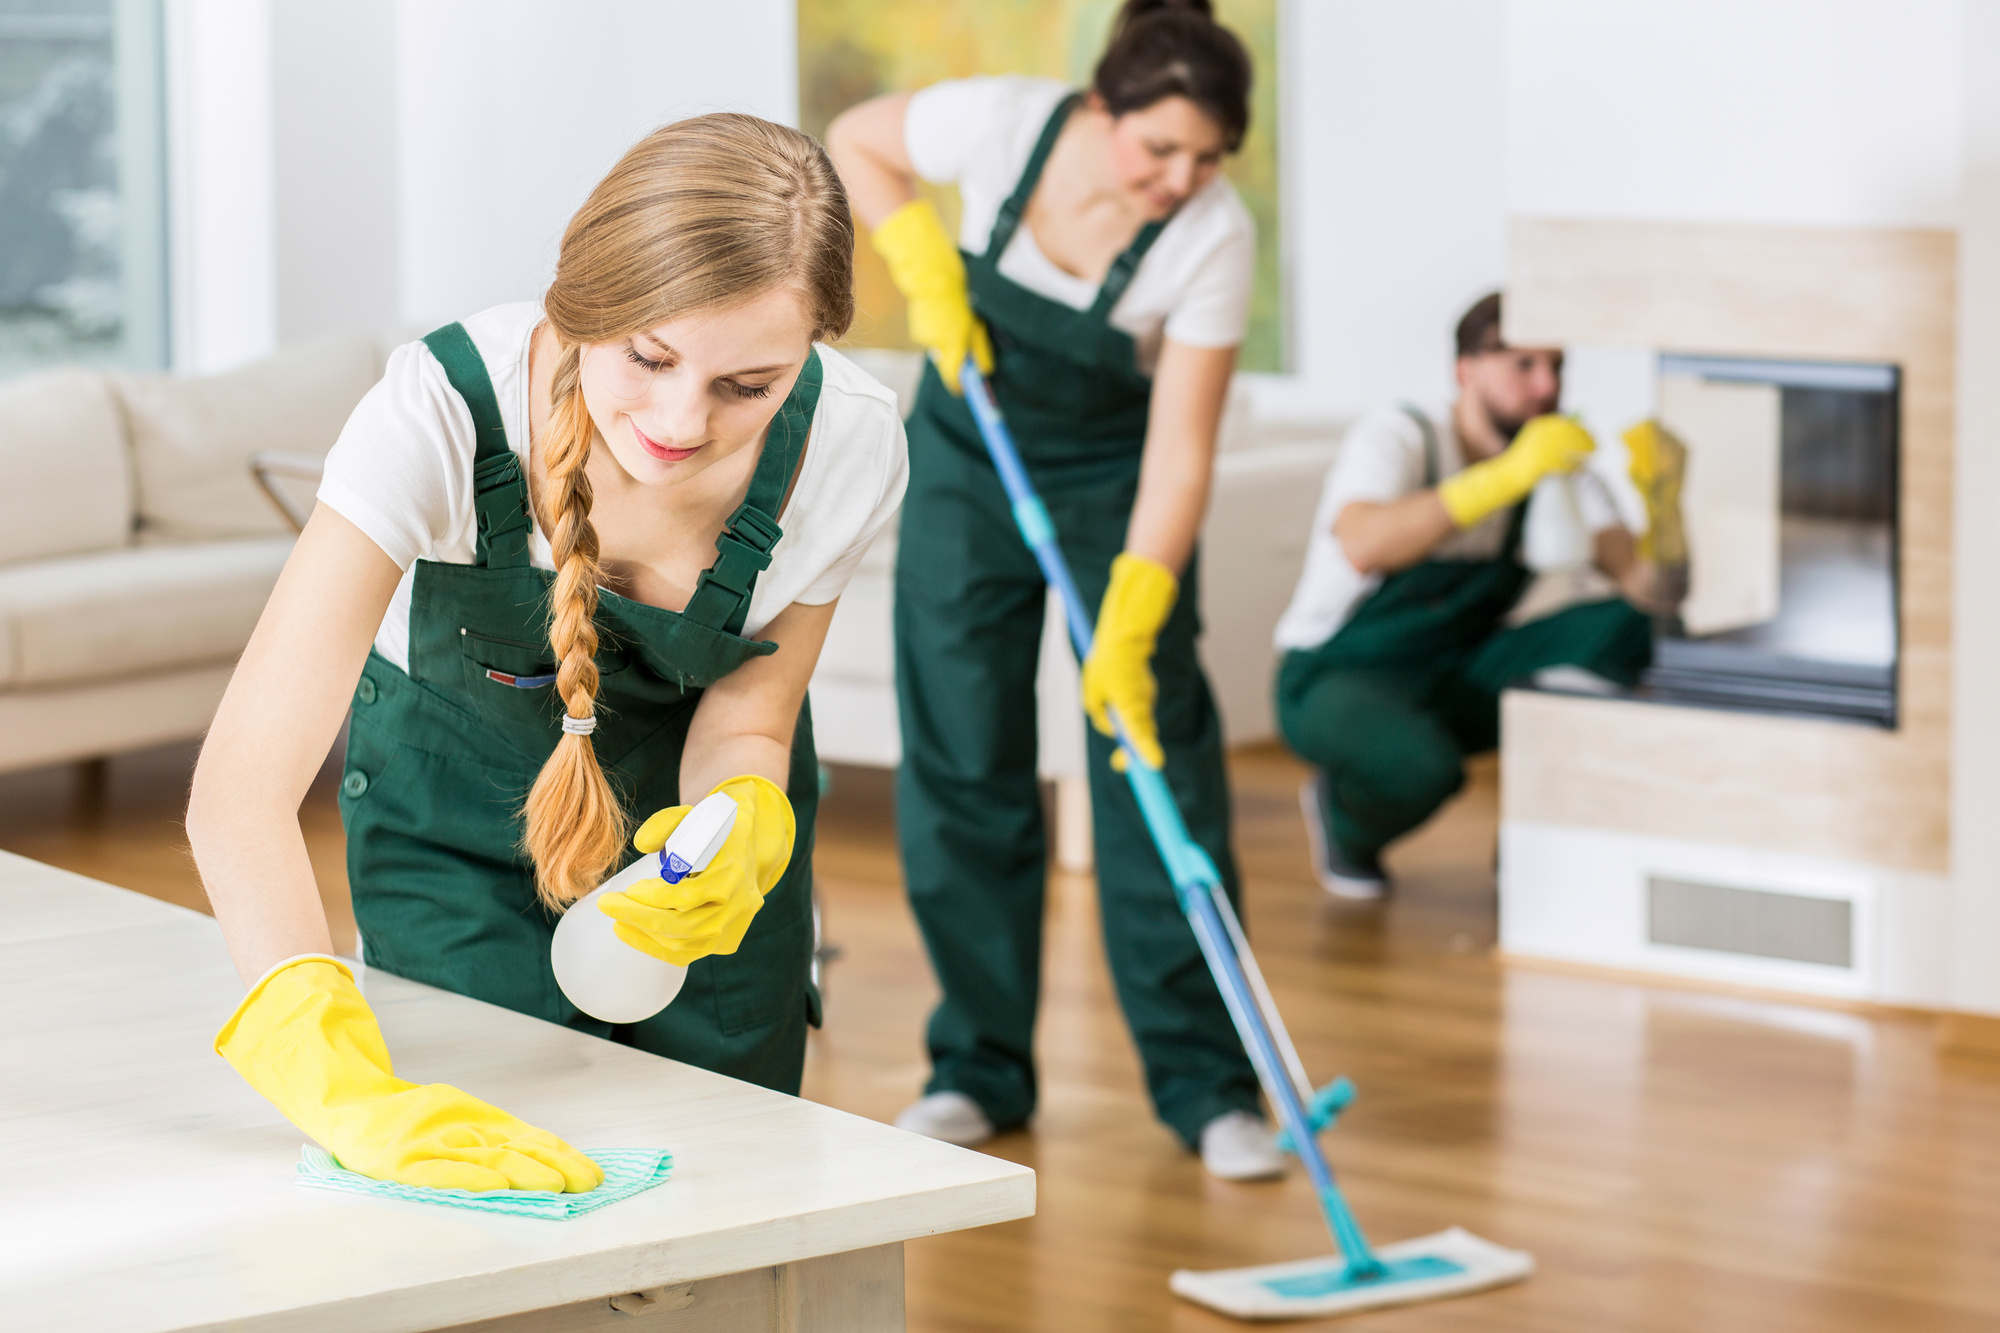 4 Qualities To Look For When Hiring a Residential Cleaning Service